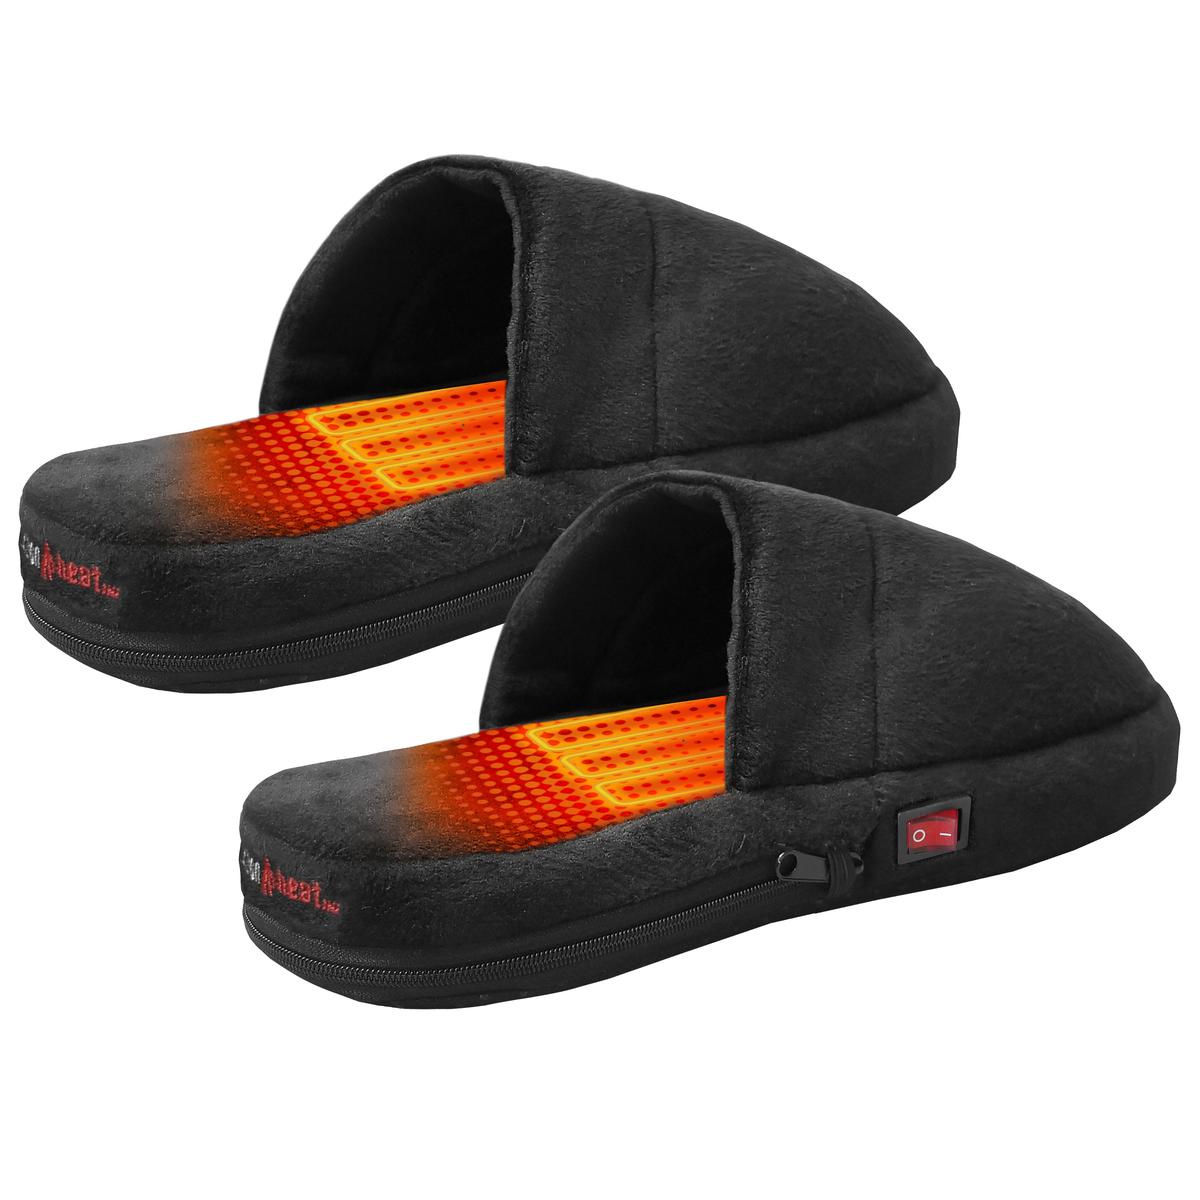 ActionHeat AA Battery Heated Slippers - Front